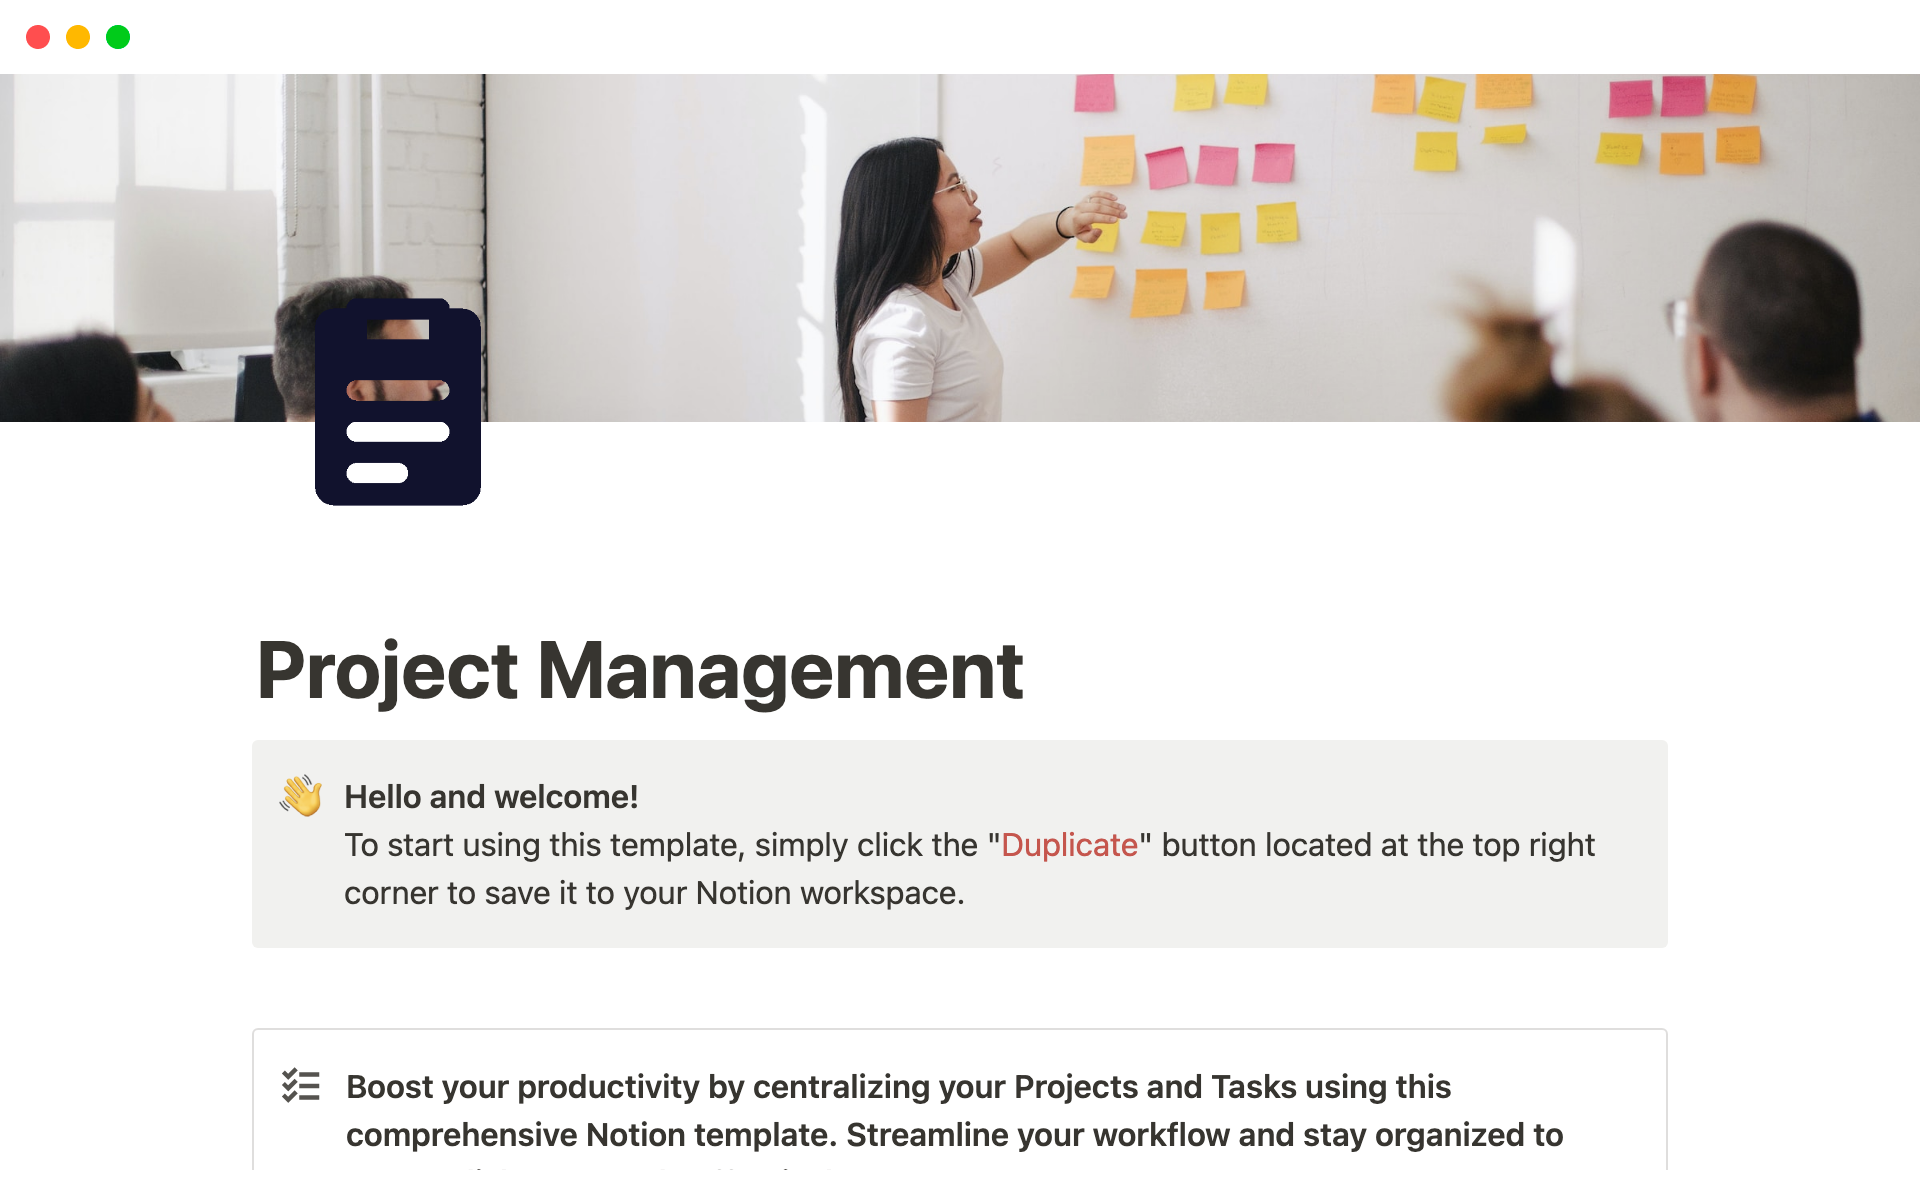 Boost your productivity by centralizing your Projects and Tasks using this comprehensive Notion template